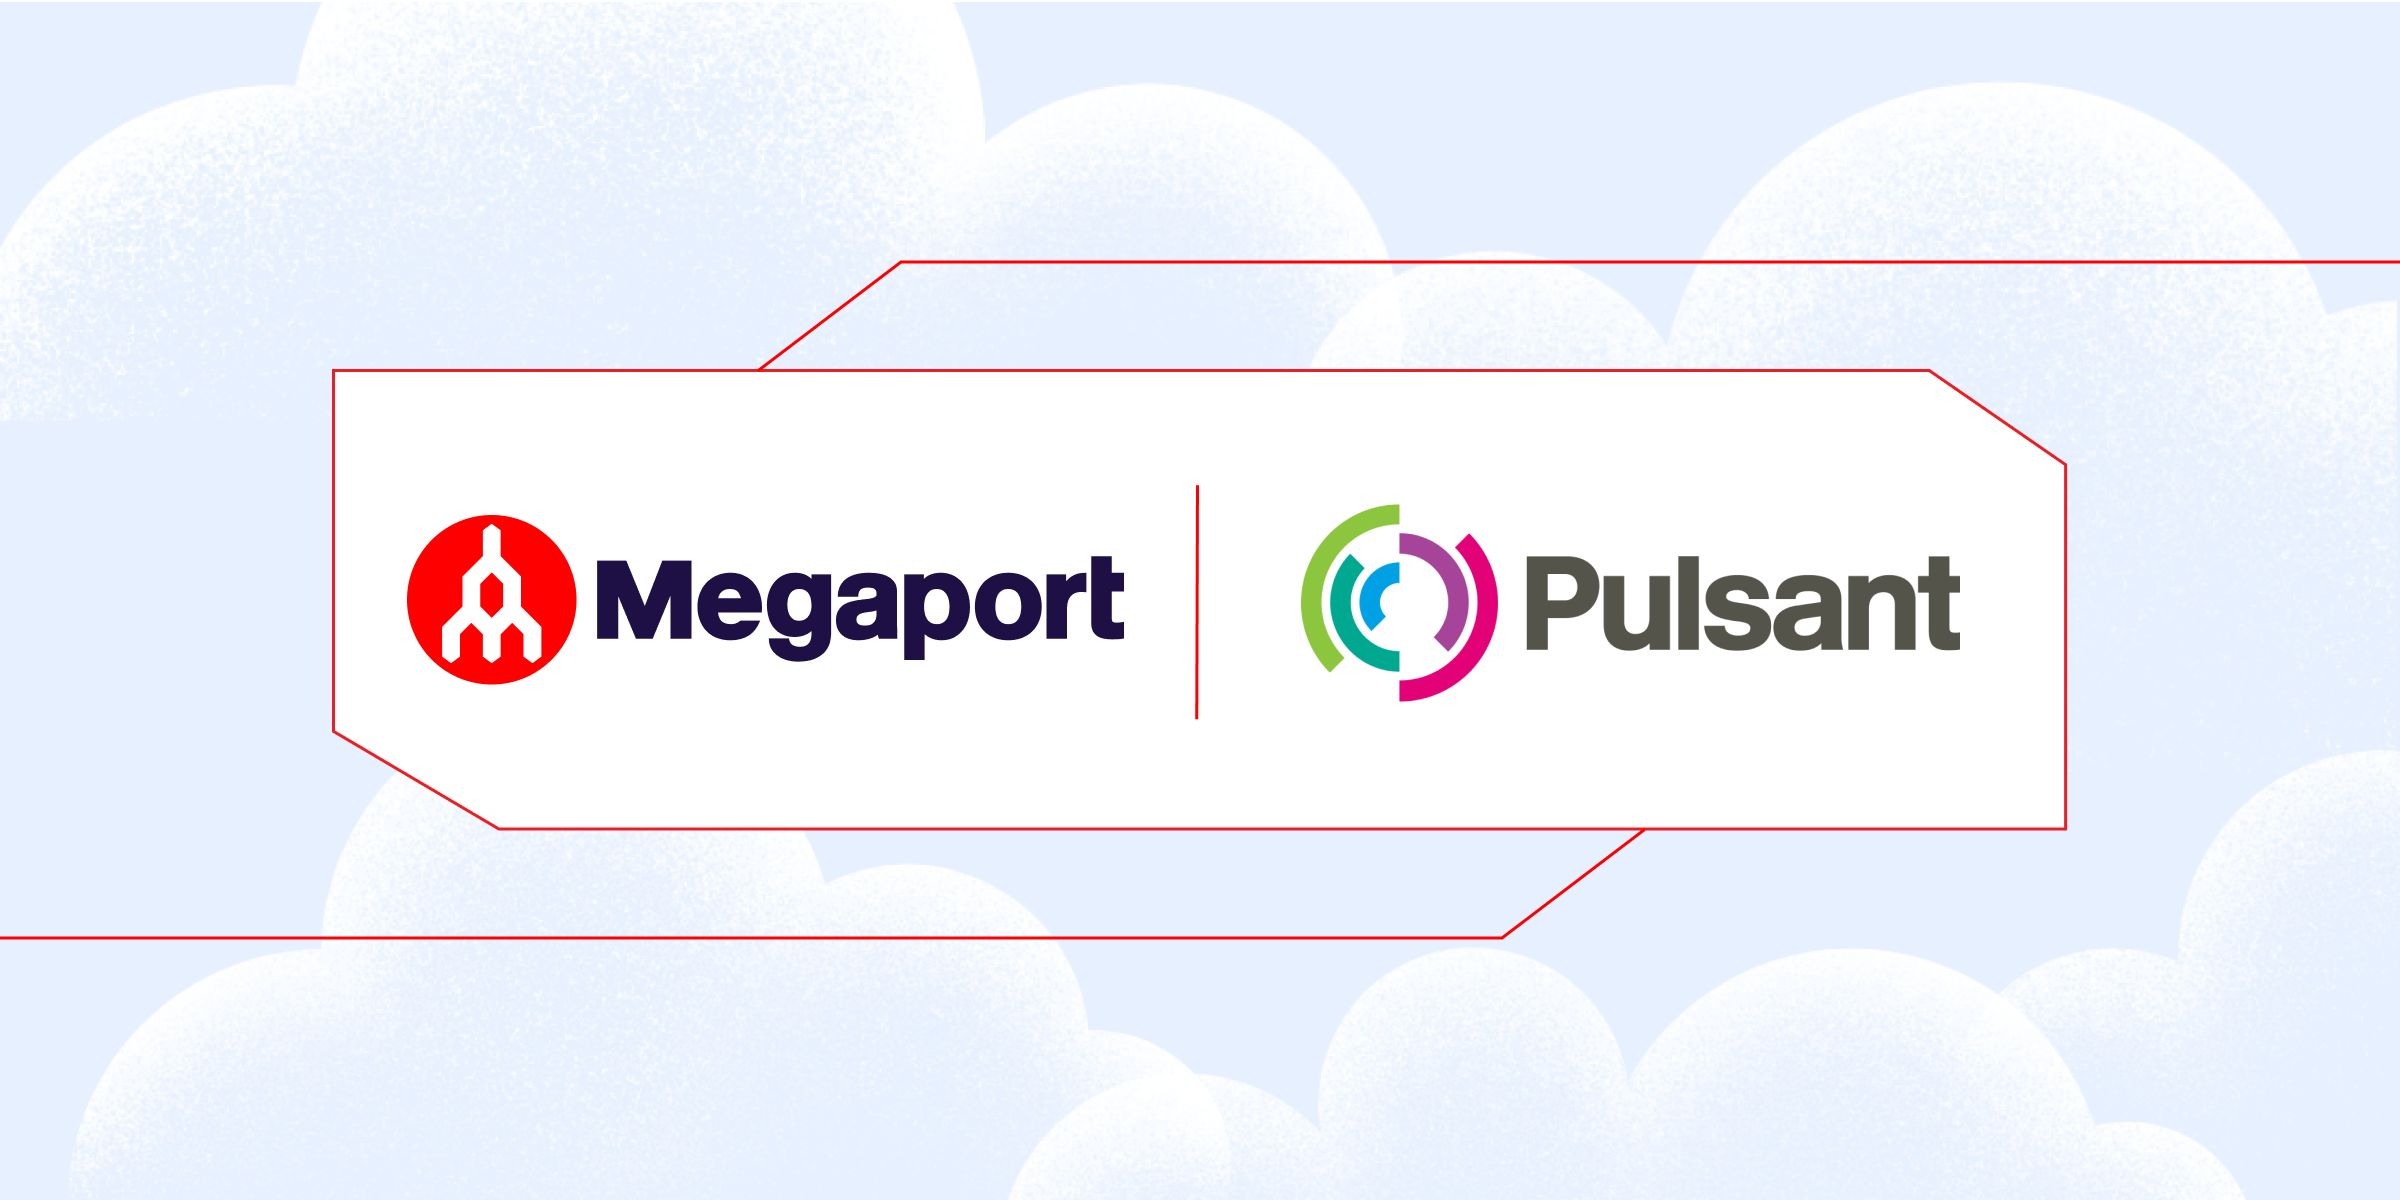 Pulsant Takes Steps to Become the UK’s Platform for Connecting Business_Megaport blog